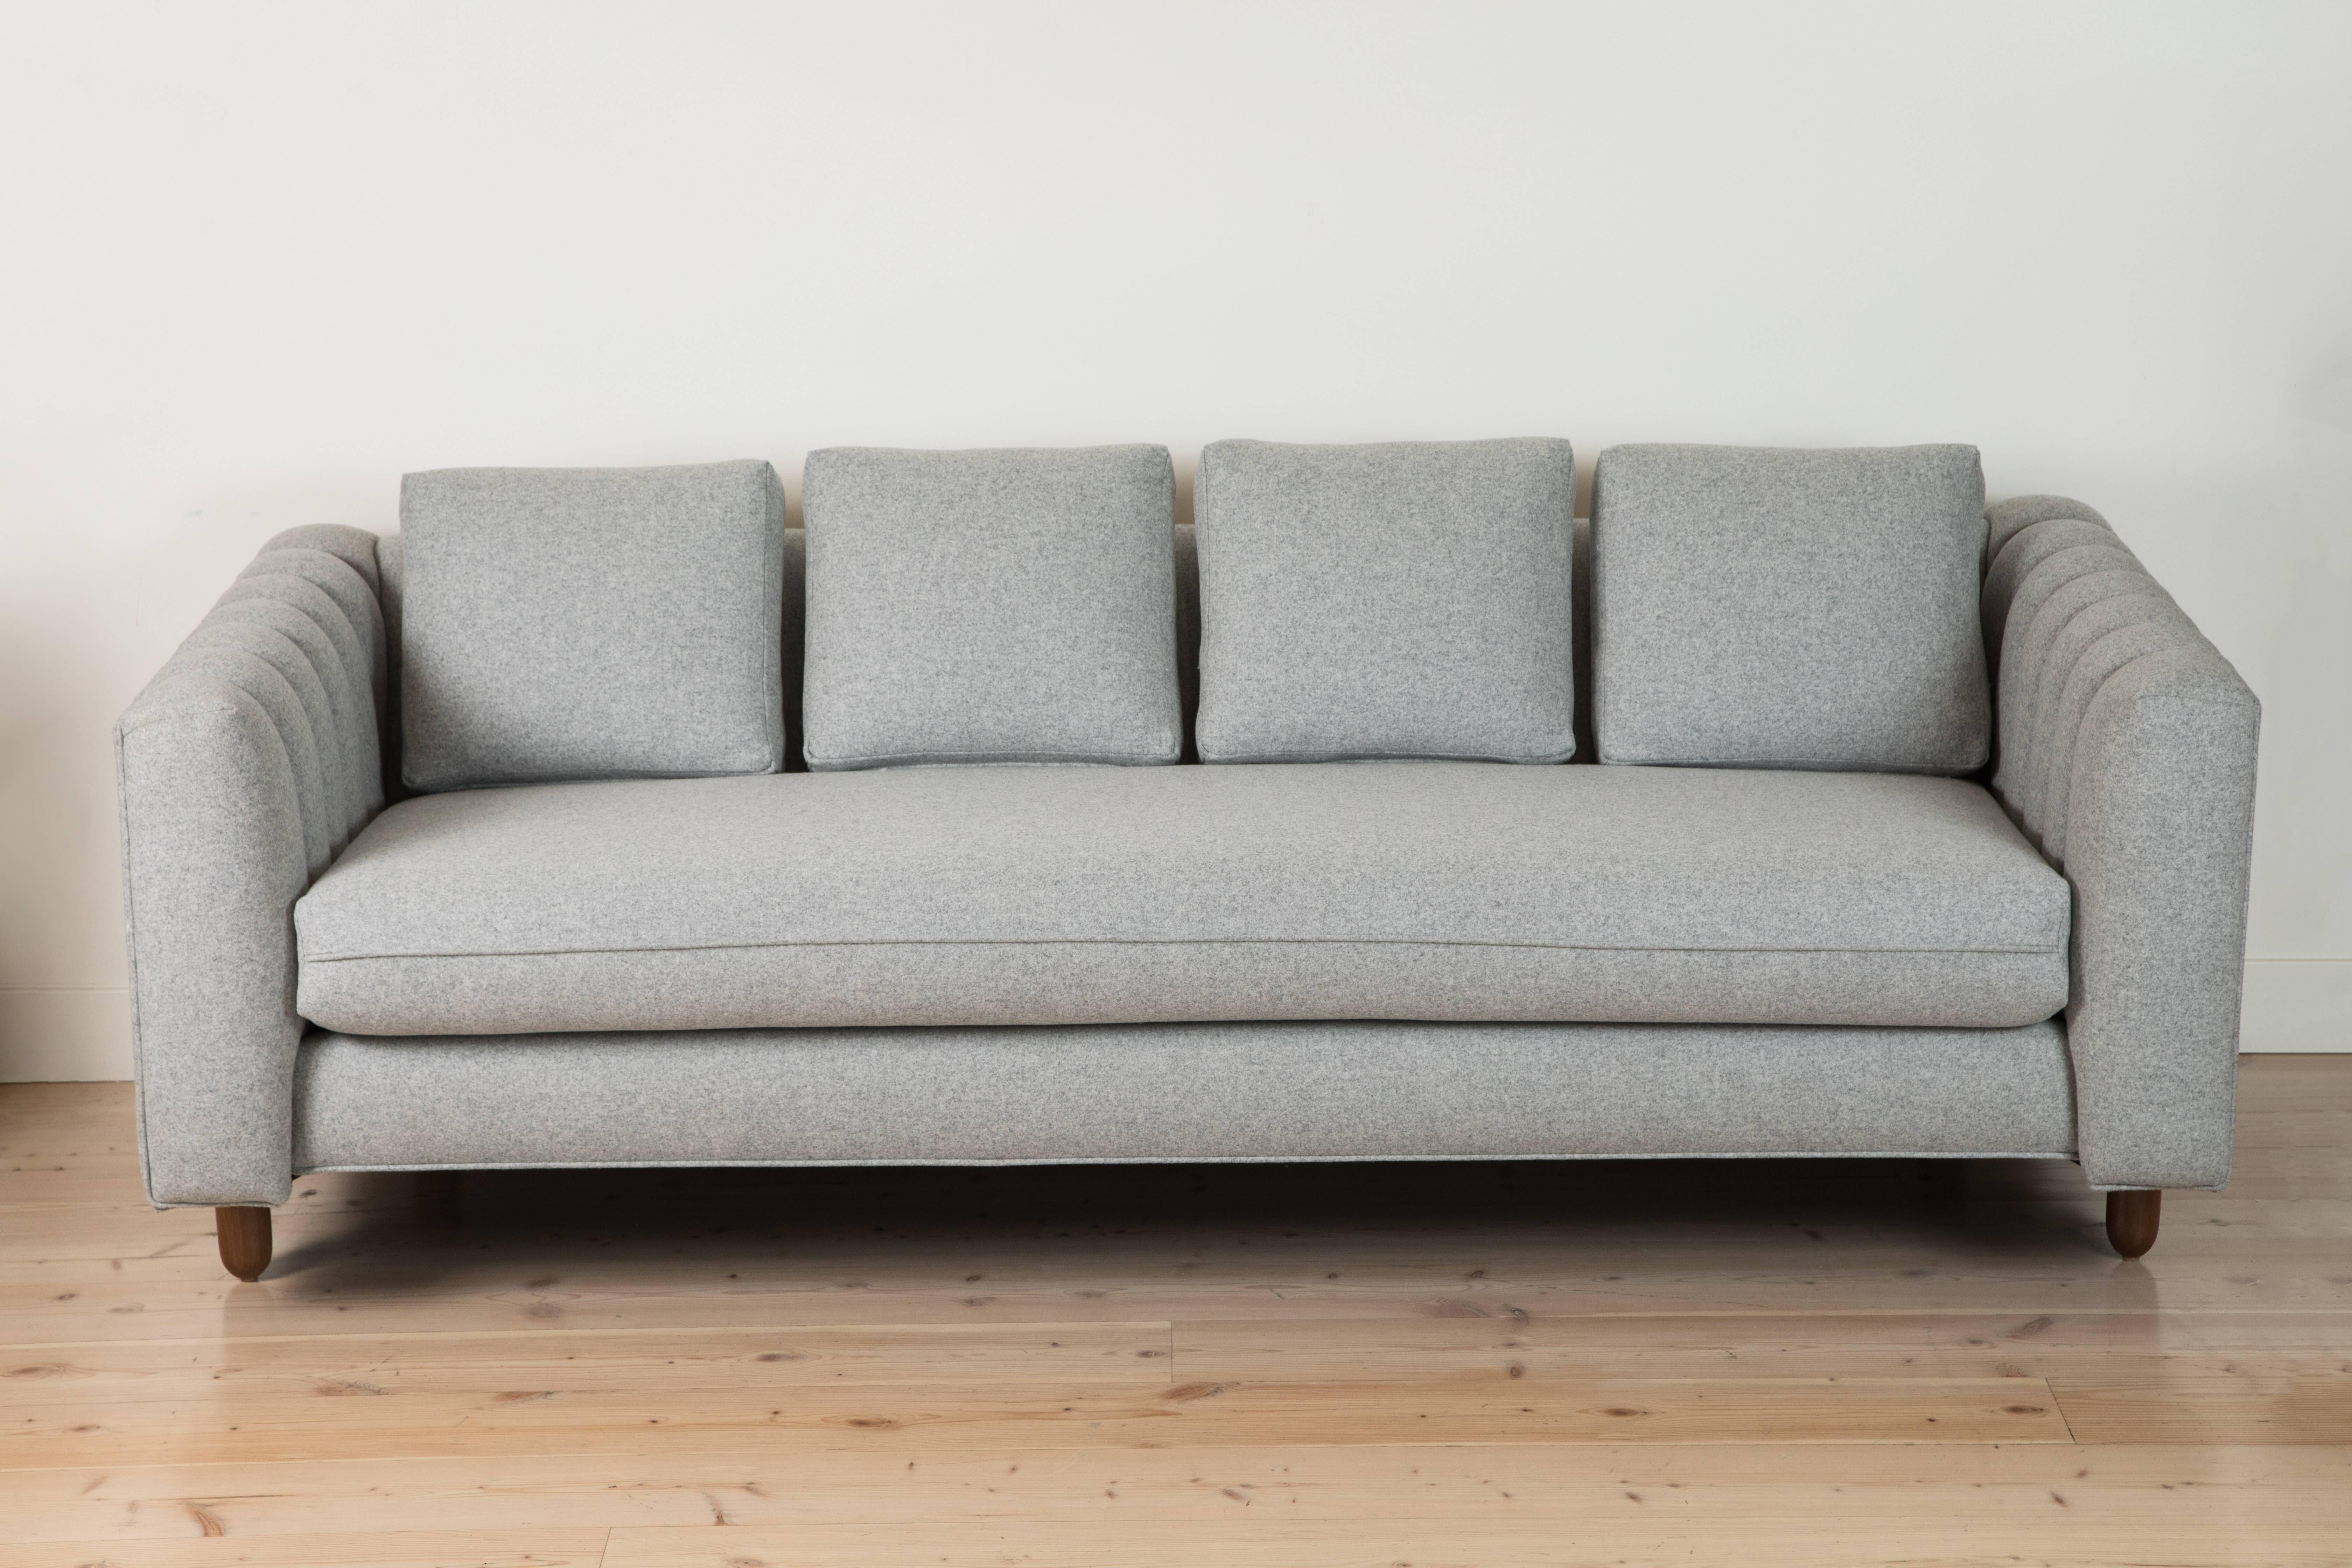 The Isherwood Sofa features a channel tufted body with loose bolster cushions. The turned legs are made of solid white oak or American walnut and are inset on the sides revealing the leg detail.

Also available in Customer's Own Material with a 6-8